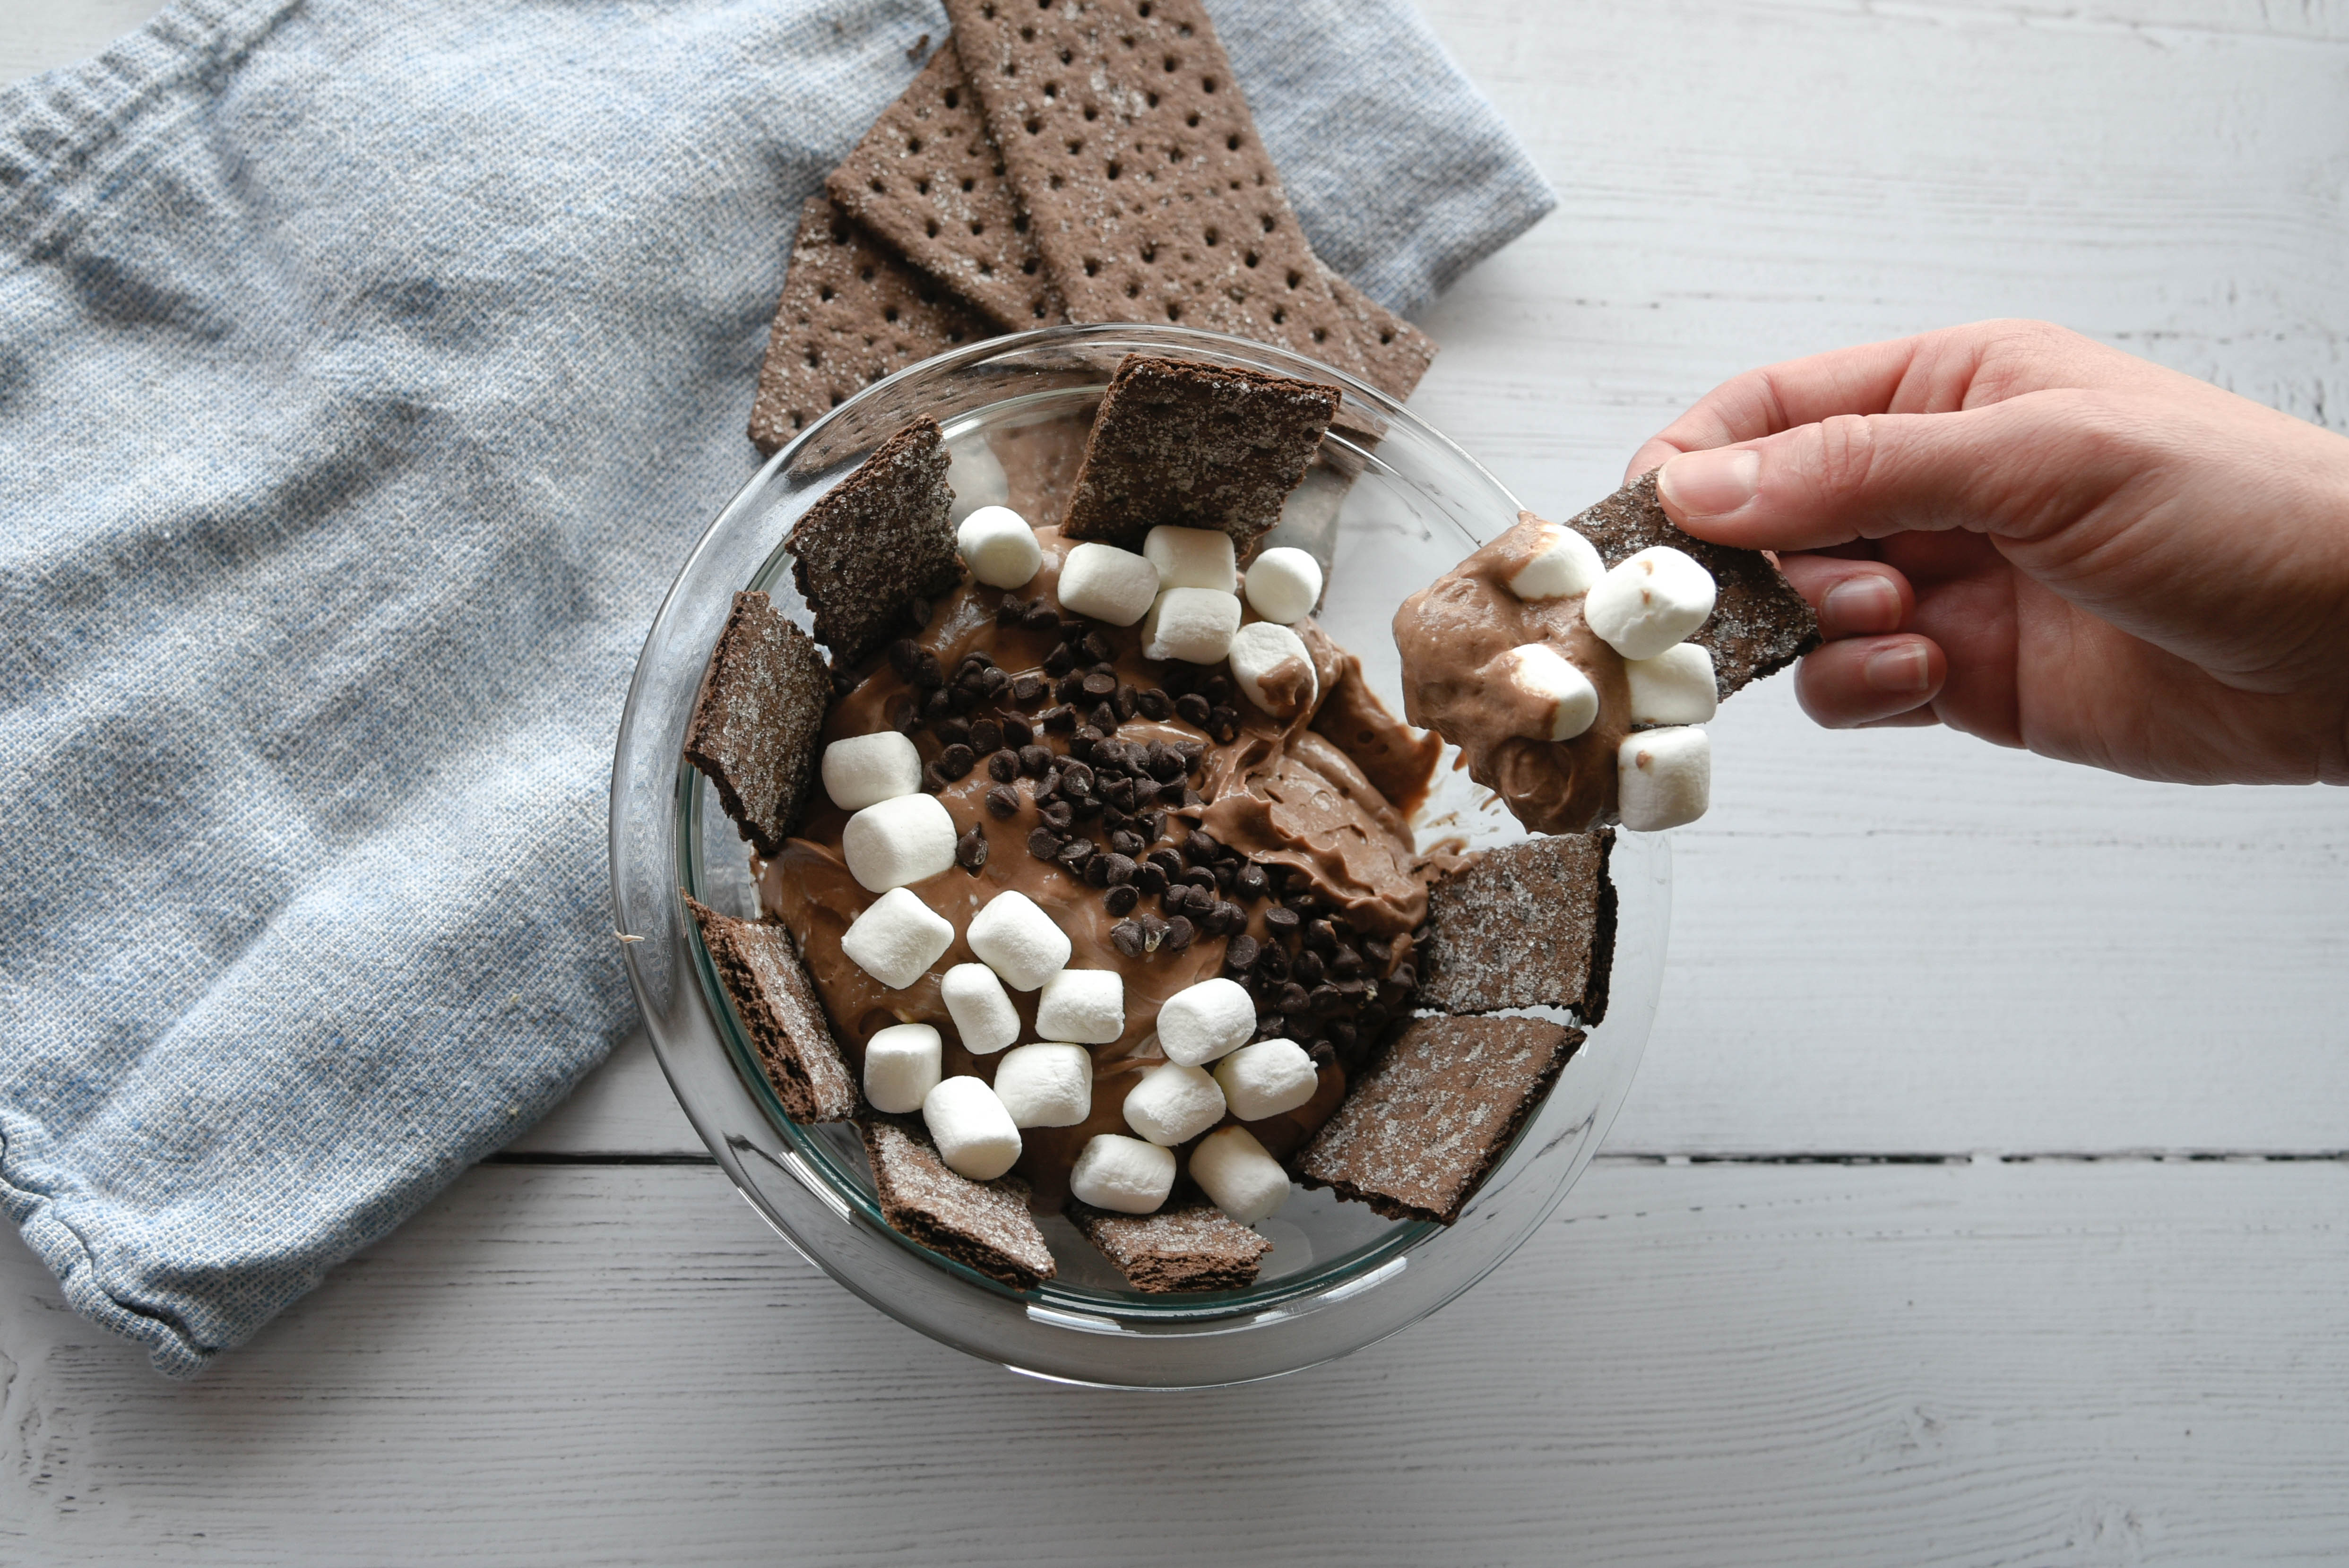 Dipping a Graham Cracker in a chocolate marshmallow concoction.